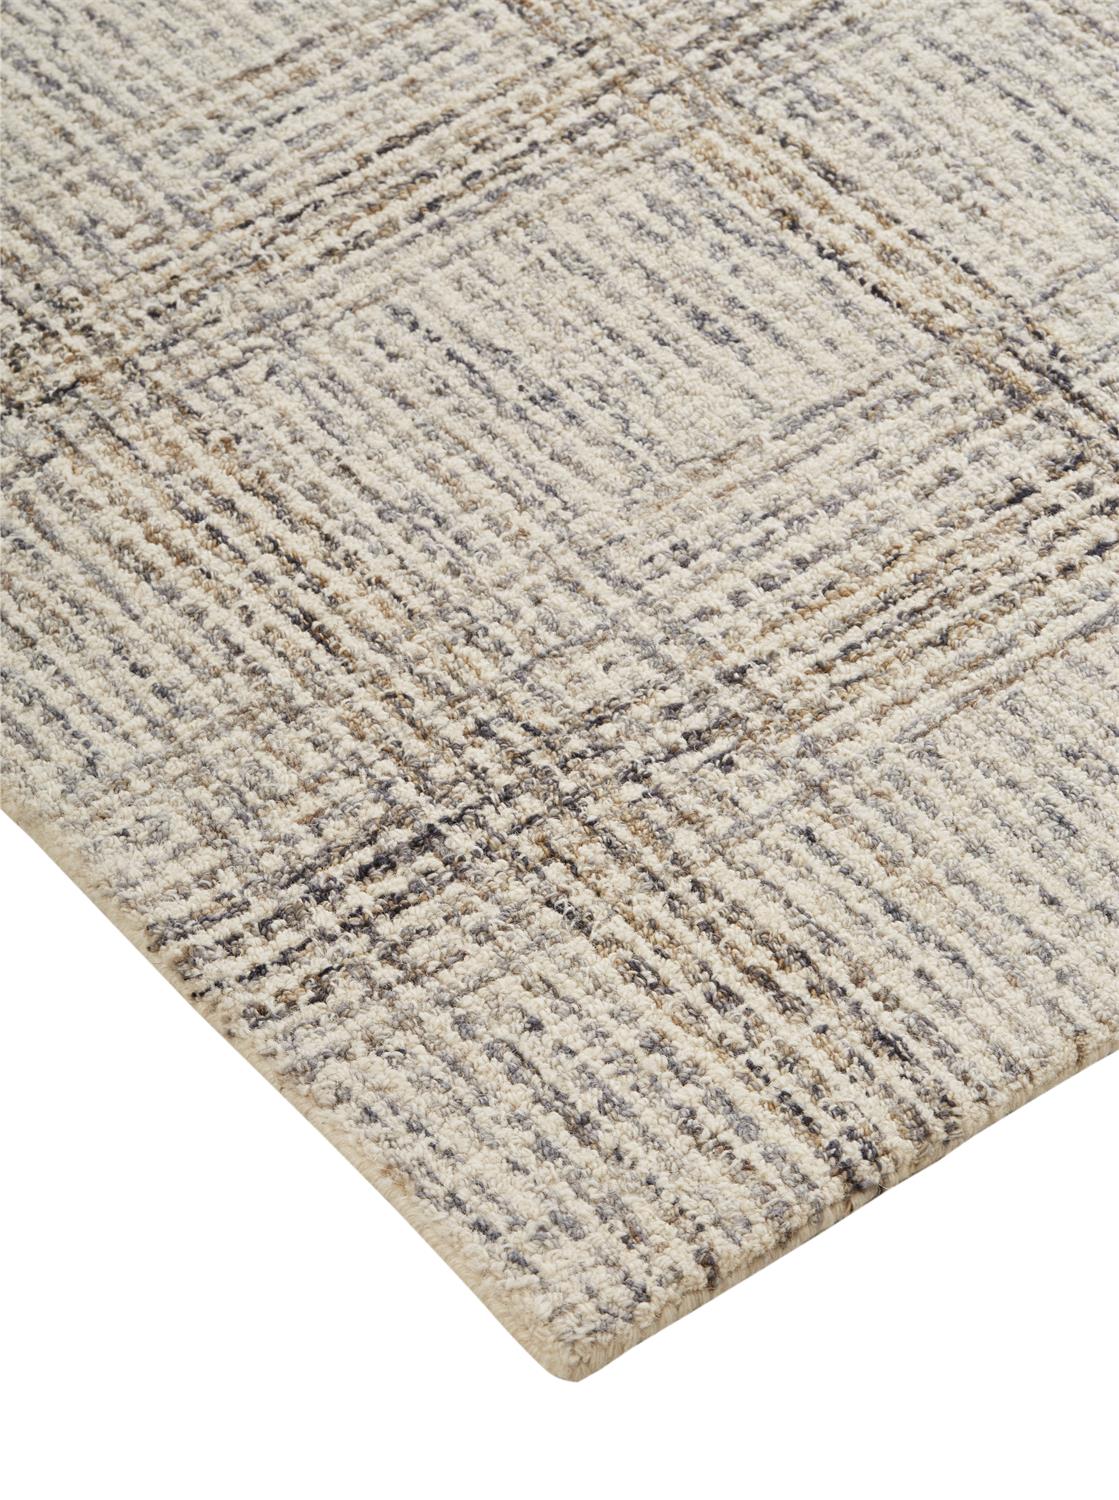 Feizy Belfort 8668F Ivory/Gray Area Rug